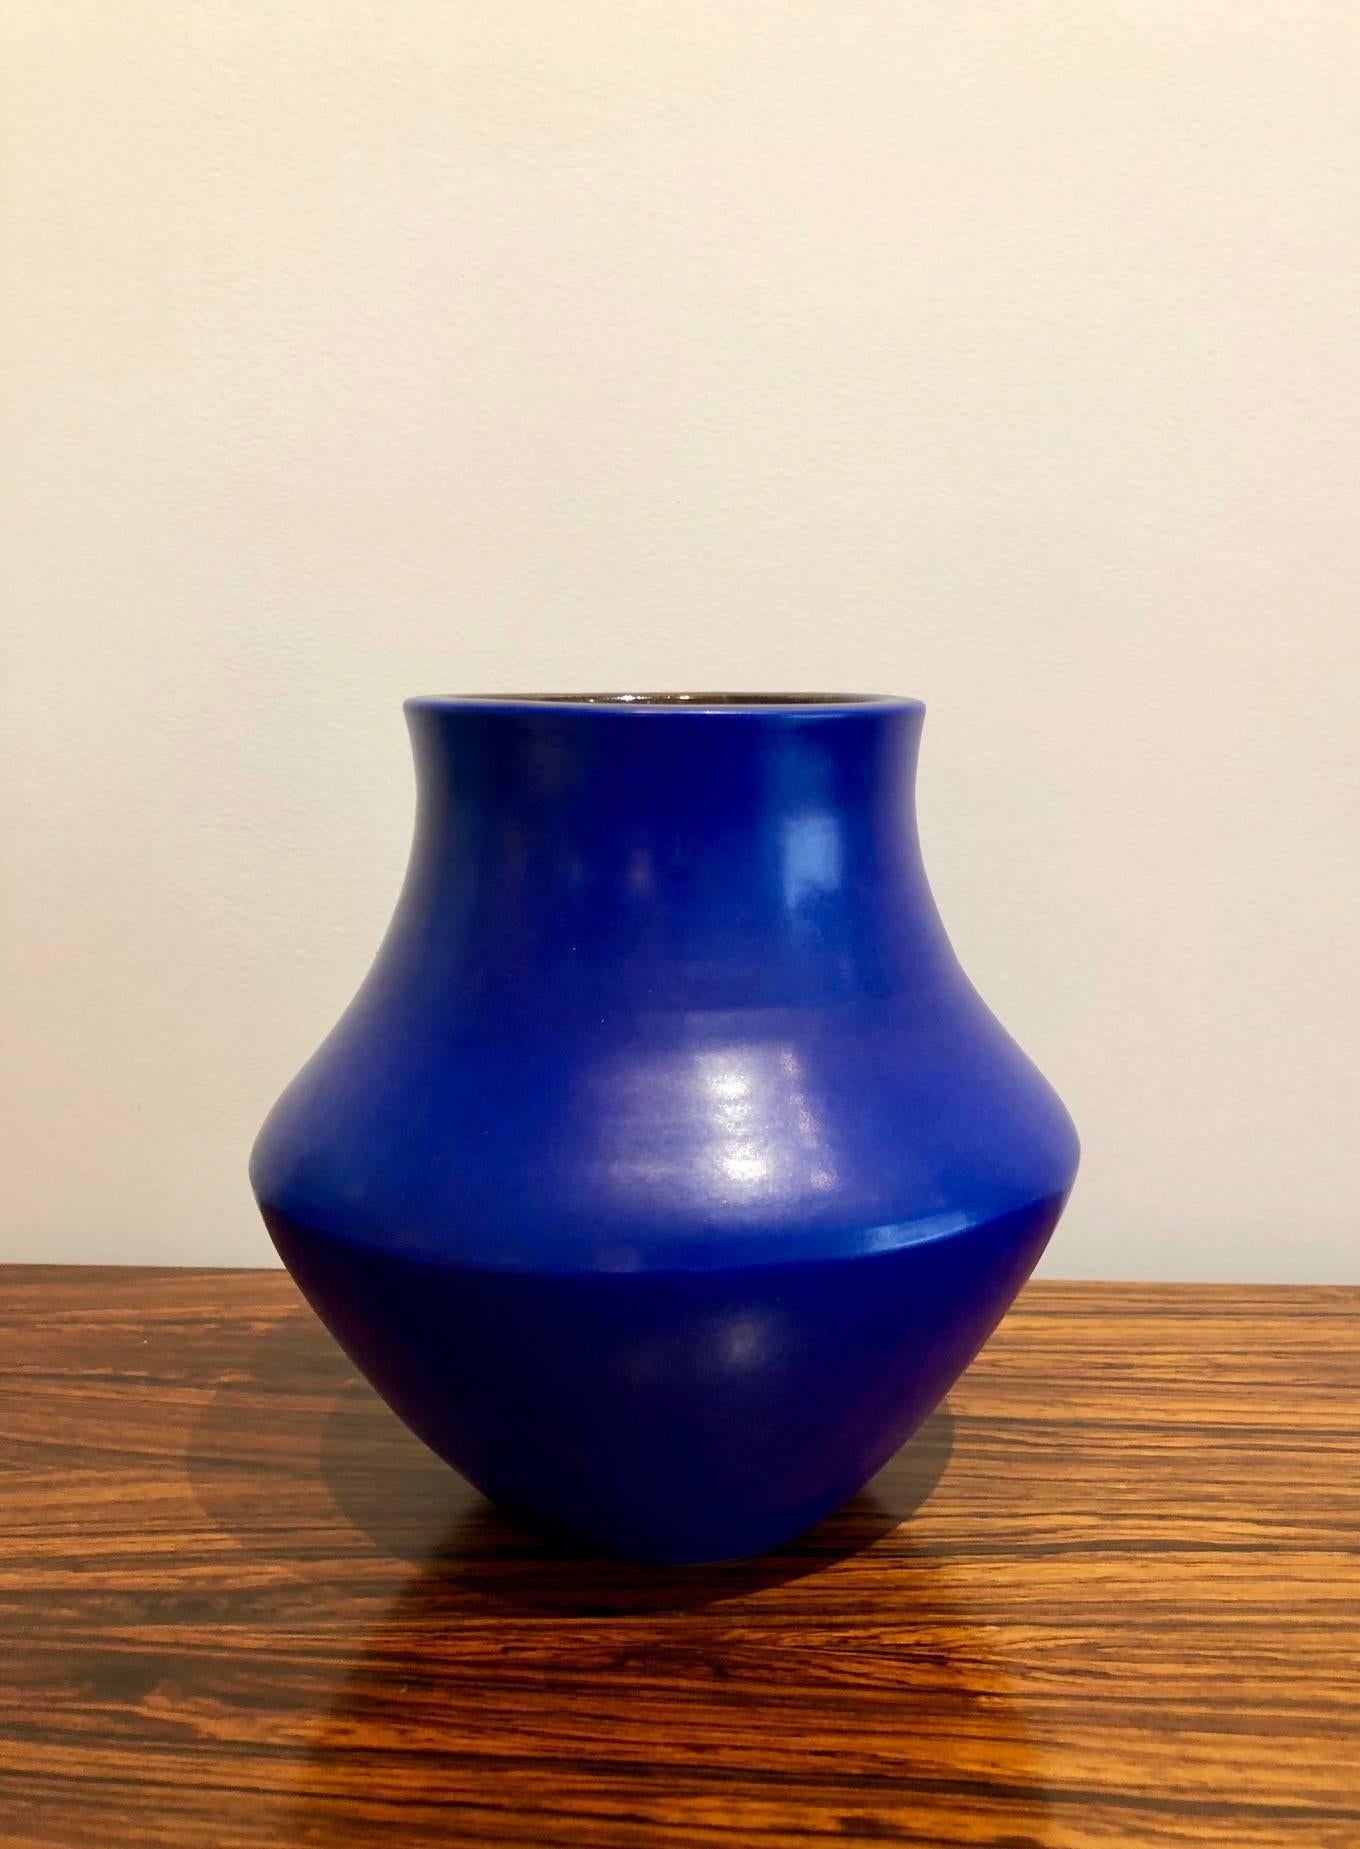 Suzanne Ramie (1907-1974), Vallauris, France

Ceramic vase by renowned French artist Suzanne Ramie´ having an amazing deep blue glaze and black inside.
Incised on the bottom with the artist stamp mark Madoura Plein Feu
Created between end of